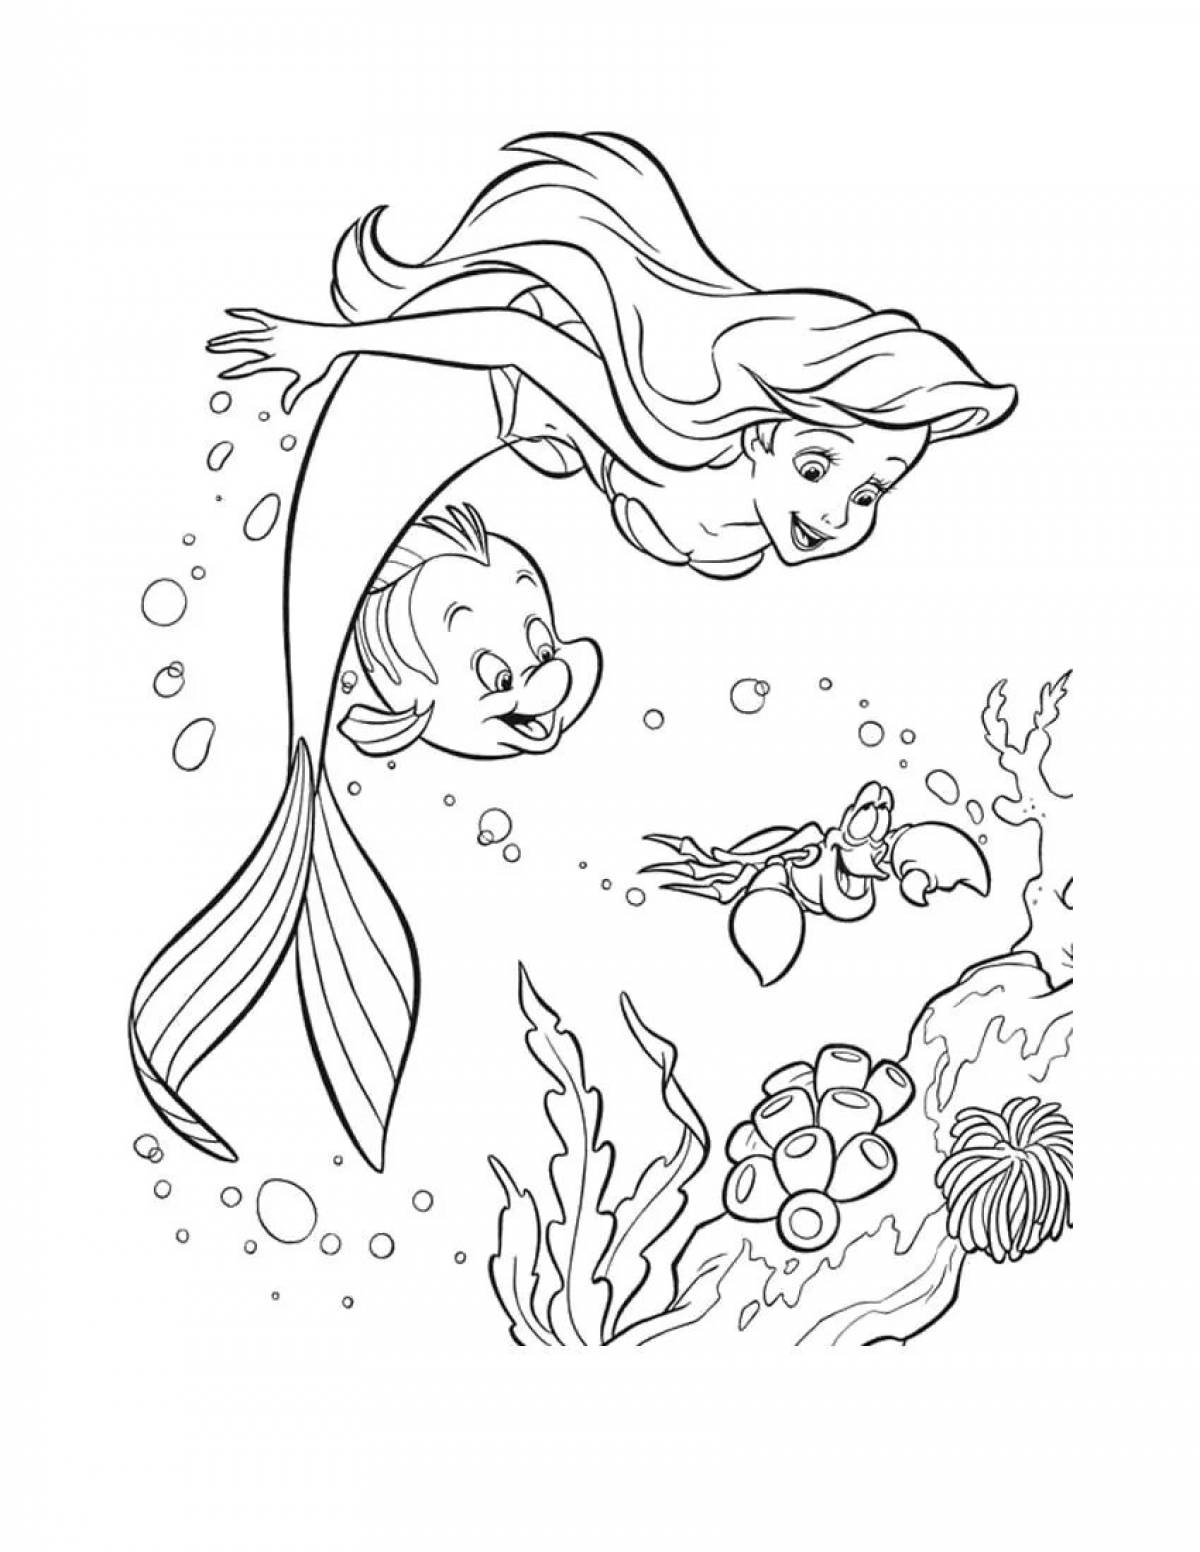 Color-mania coloring page for 6 year old girls